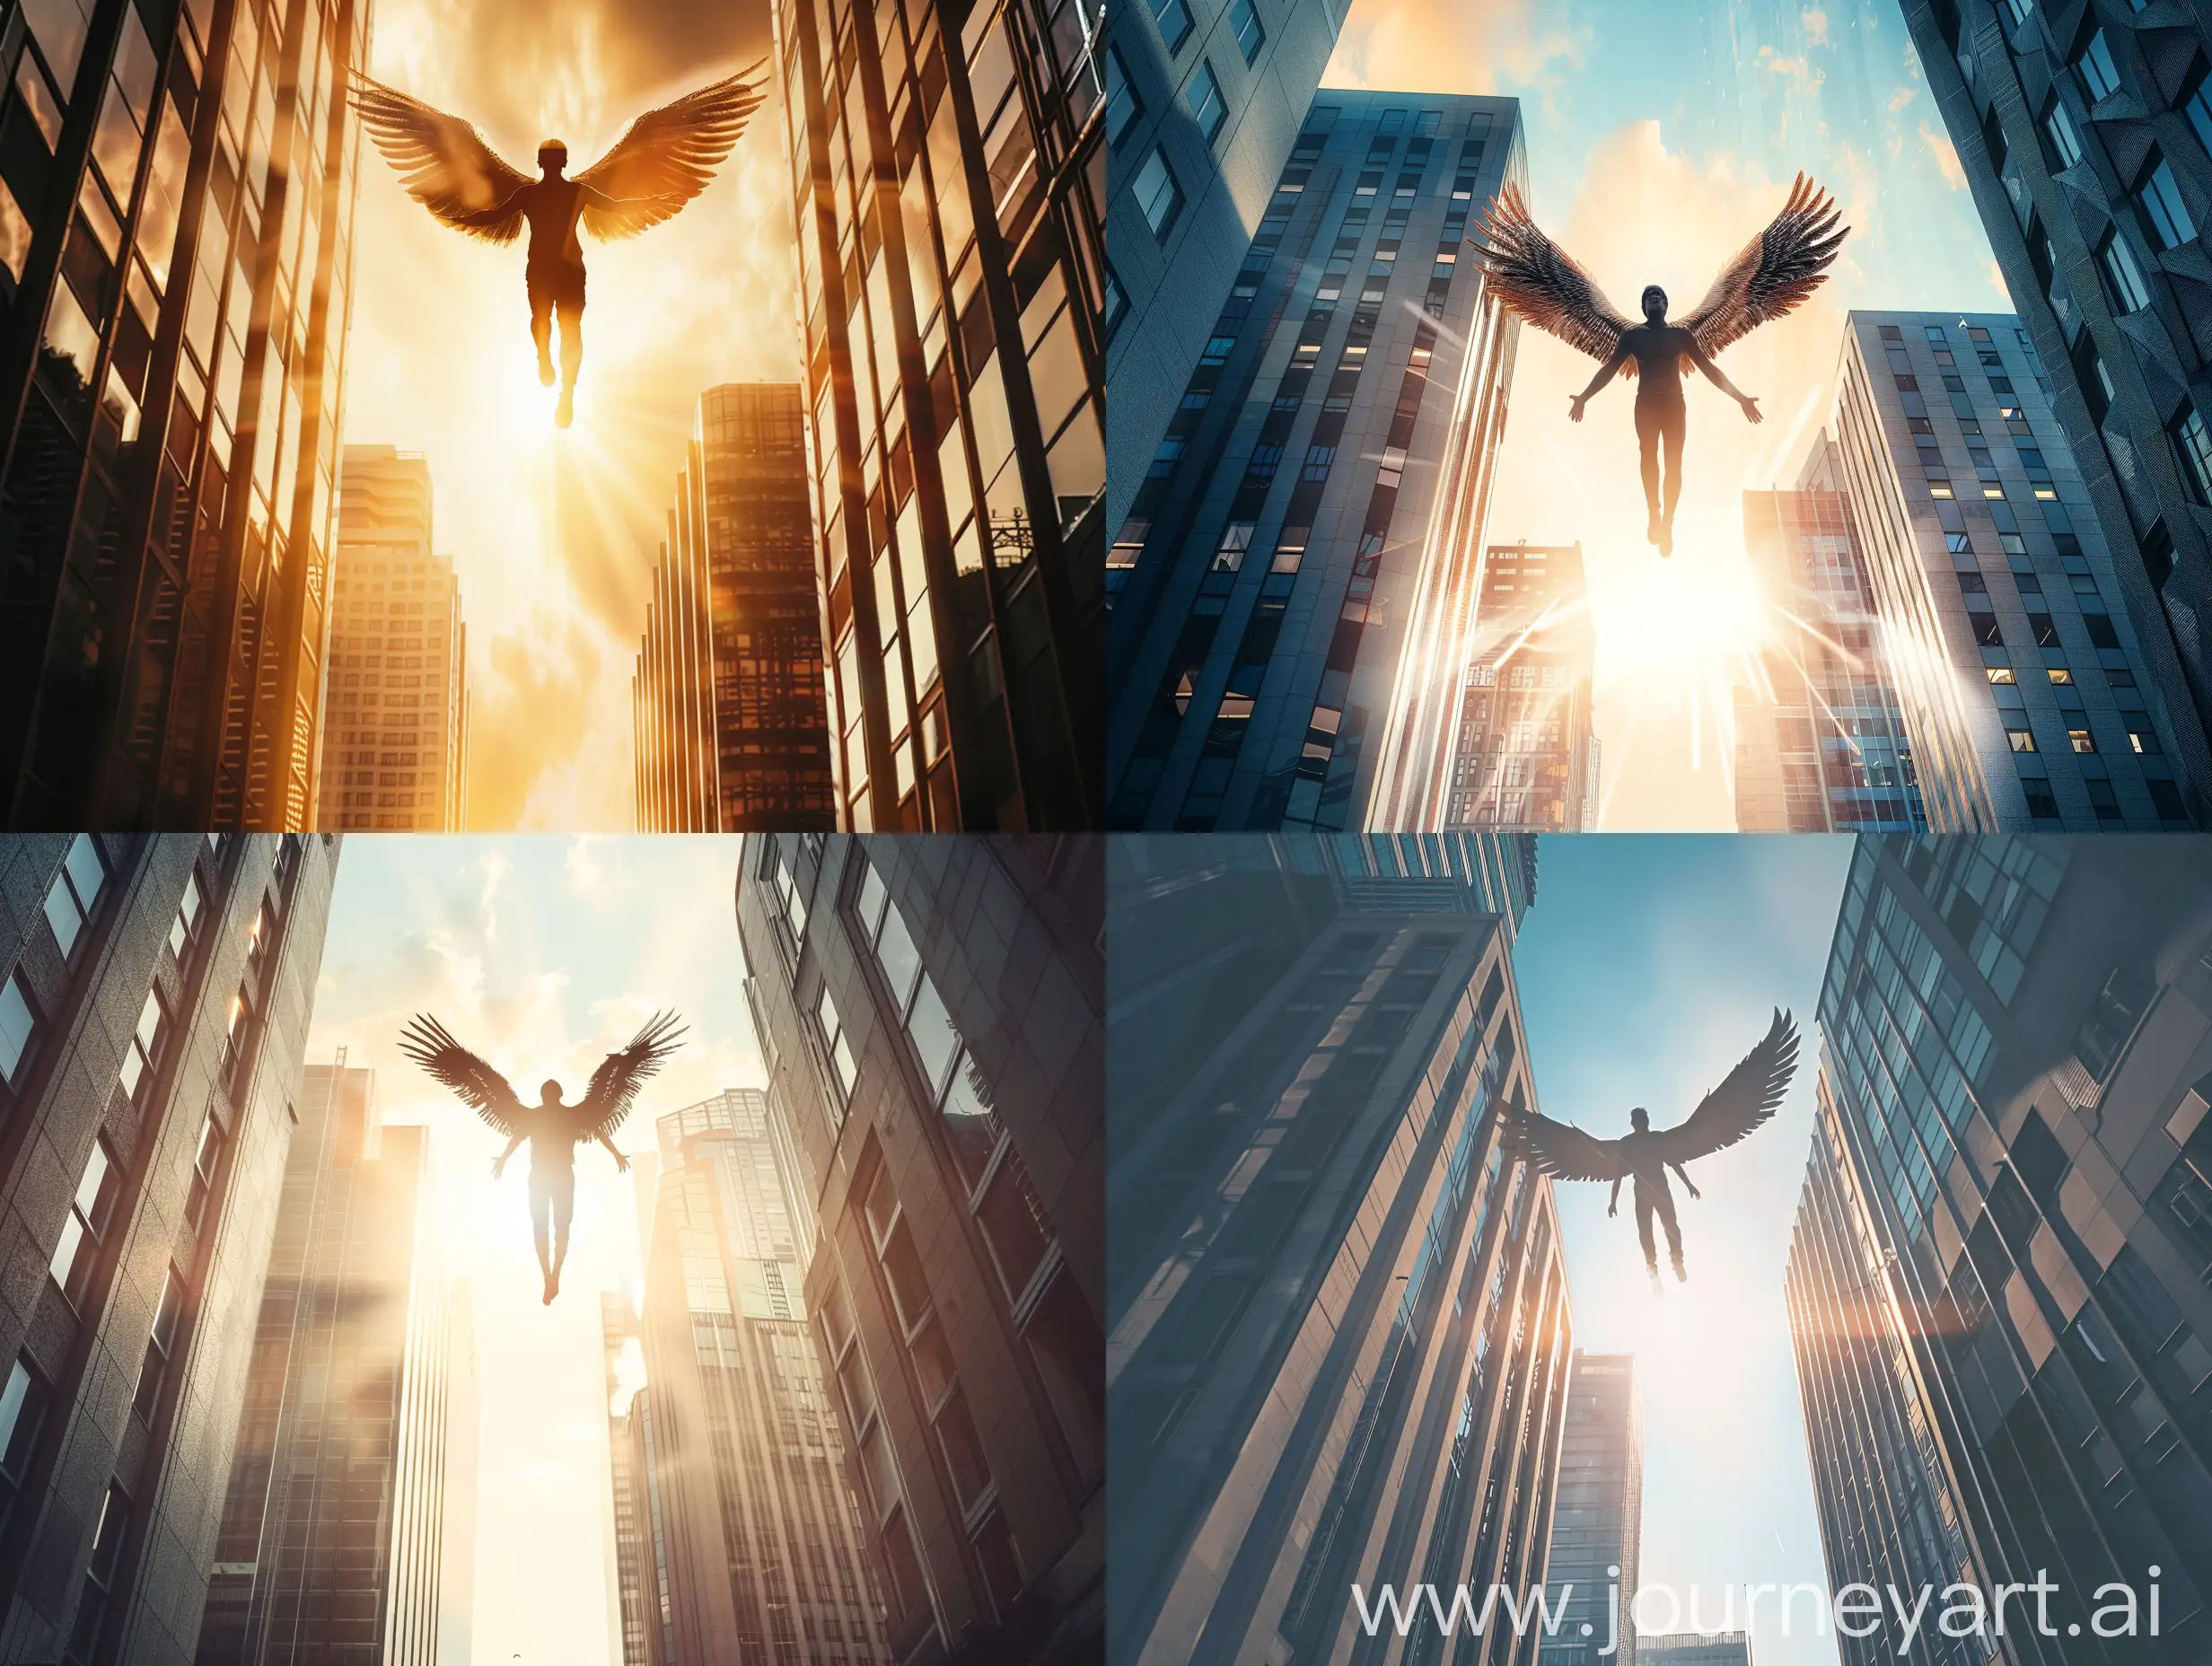 A man with wings flies between skyscrapers. The sun is shining behind him